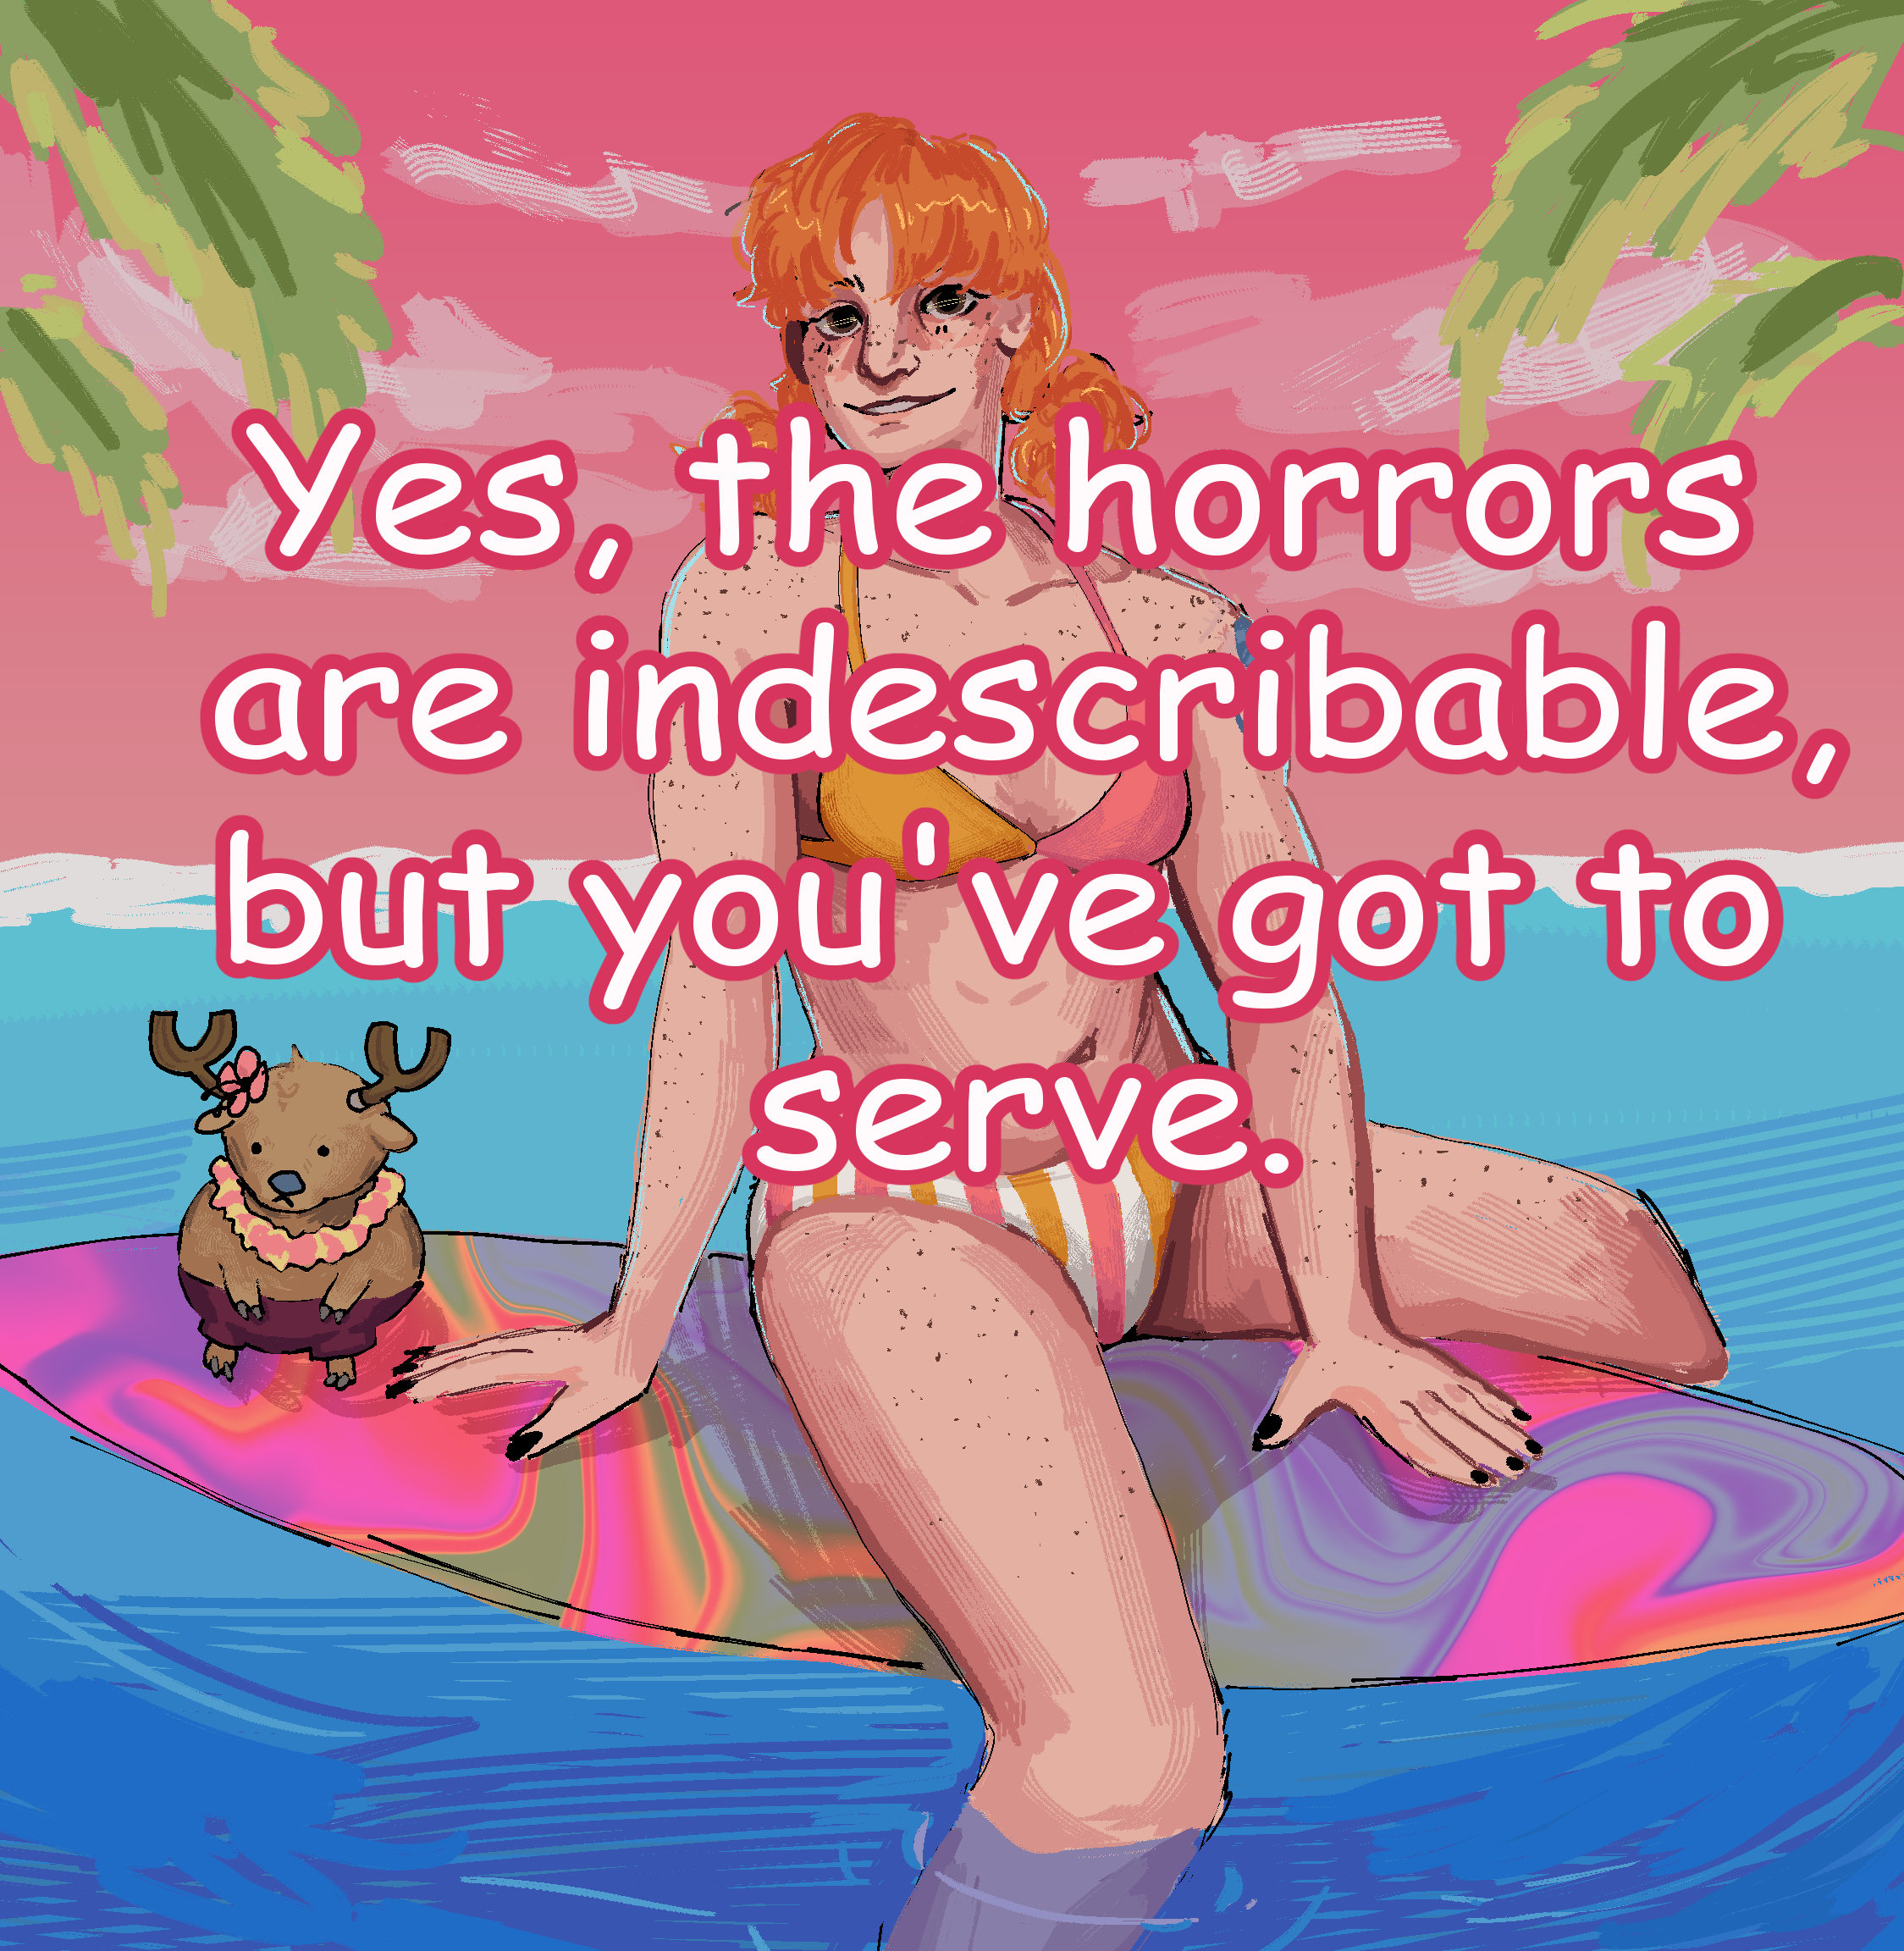 A redraw of the 'Yes, the horrors are indescribable, but you've got to serve.' meme, with Nami from One Piece instead of the girl on the surfboard, and Chopper instead of the little chihuahua. 